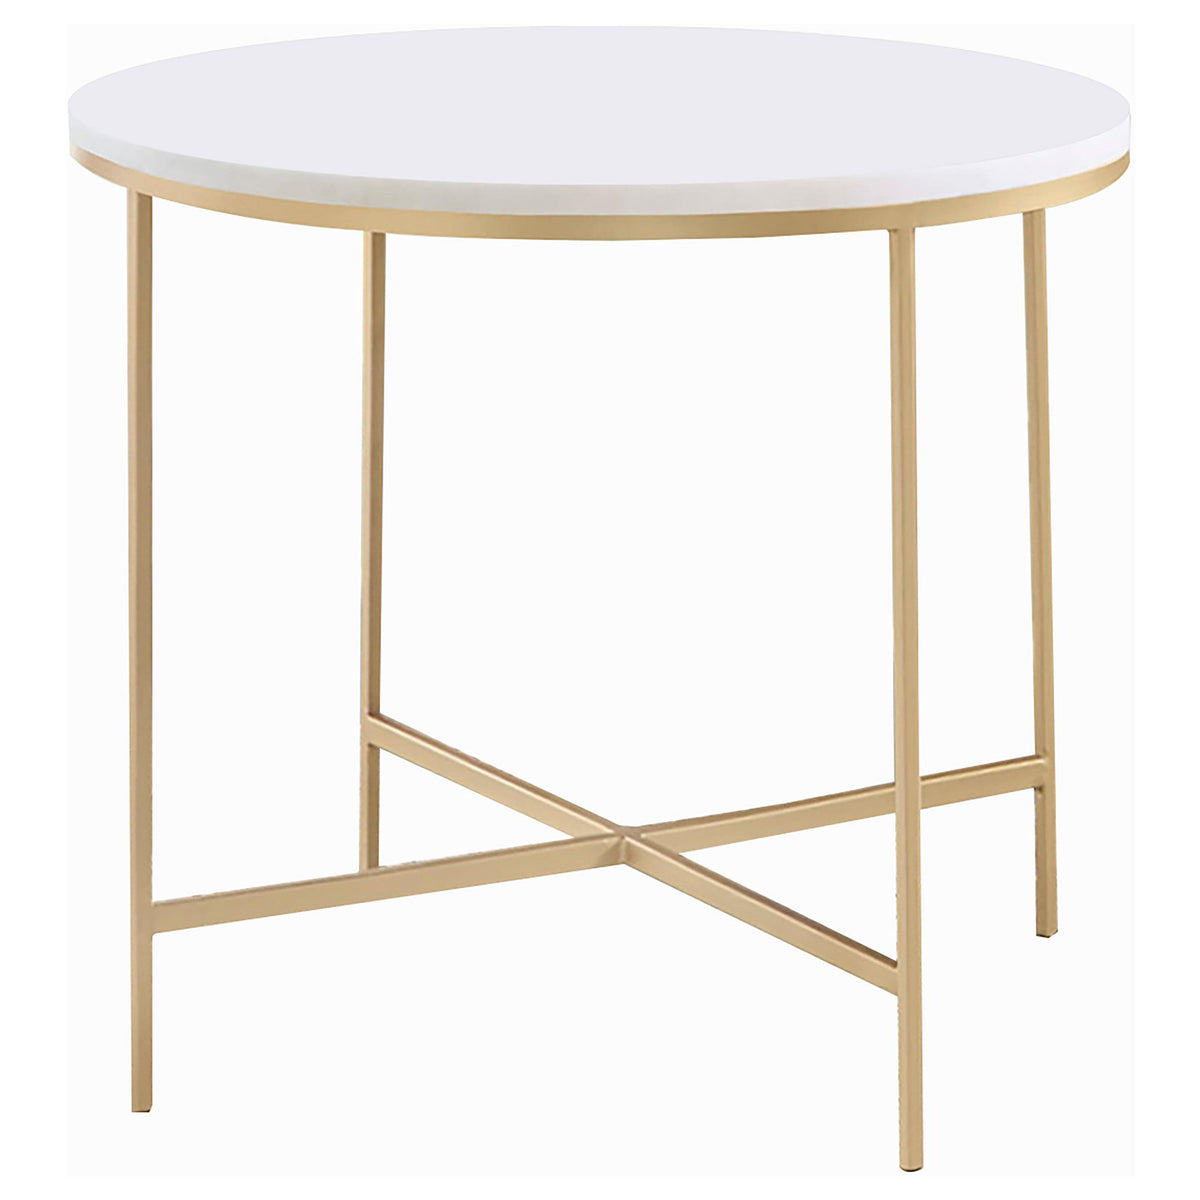 Ellison Round X-cross End Table White and Gold Ellison Round X-cross End Table White and Gold Half Price Furniture